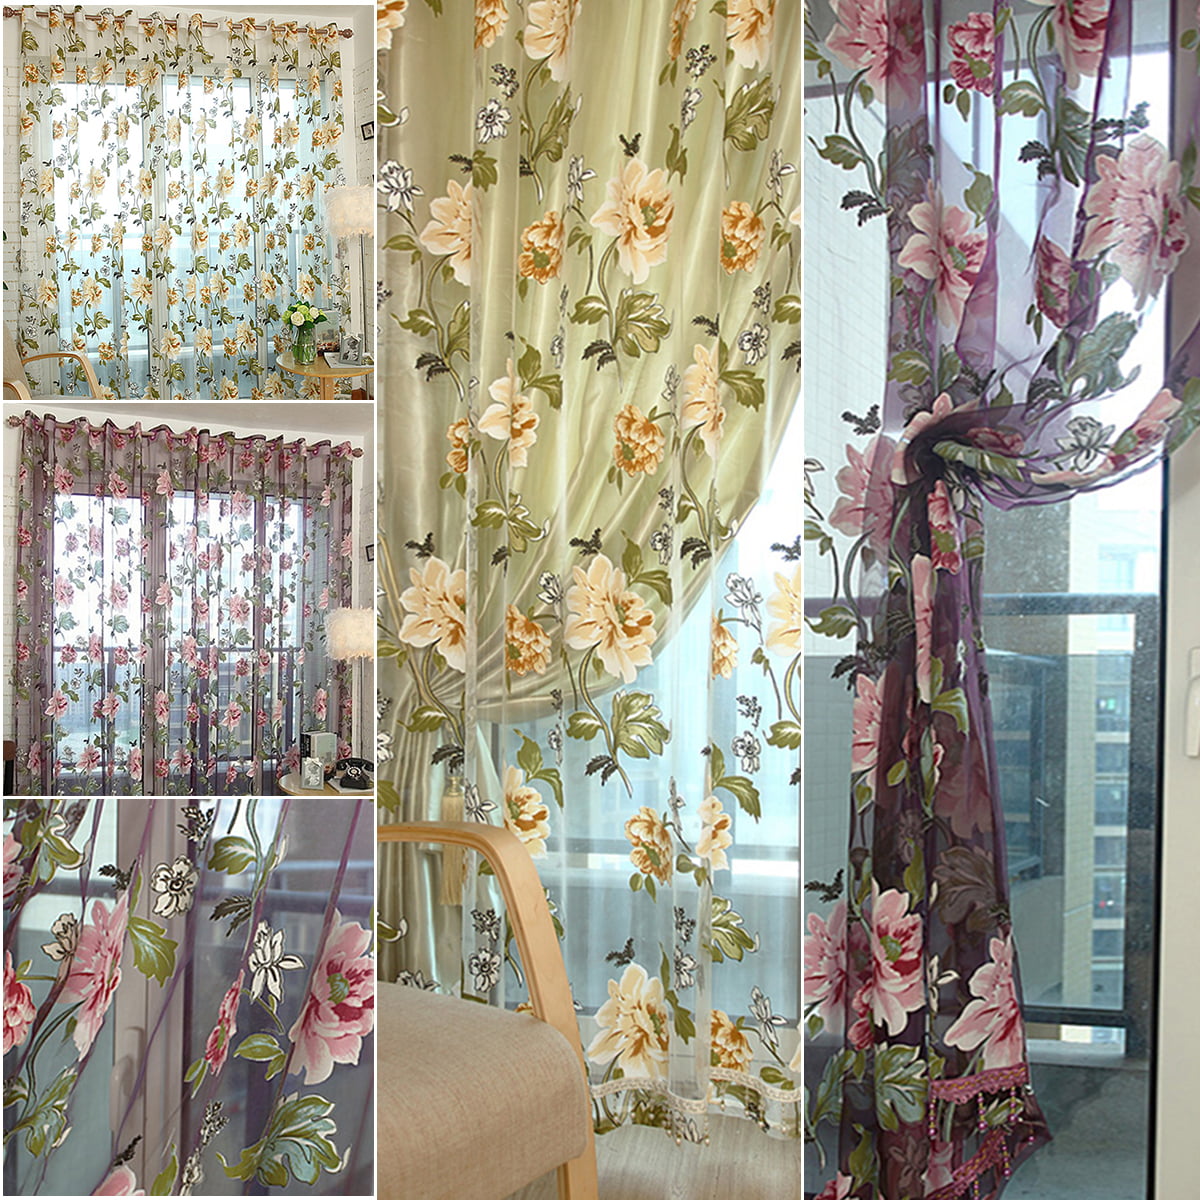 Door Window Curtain Floral Tulle Voile Drape Panel Sheer Scarf Valances Nice 